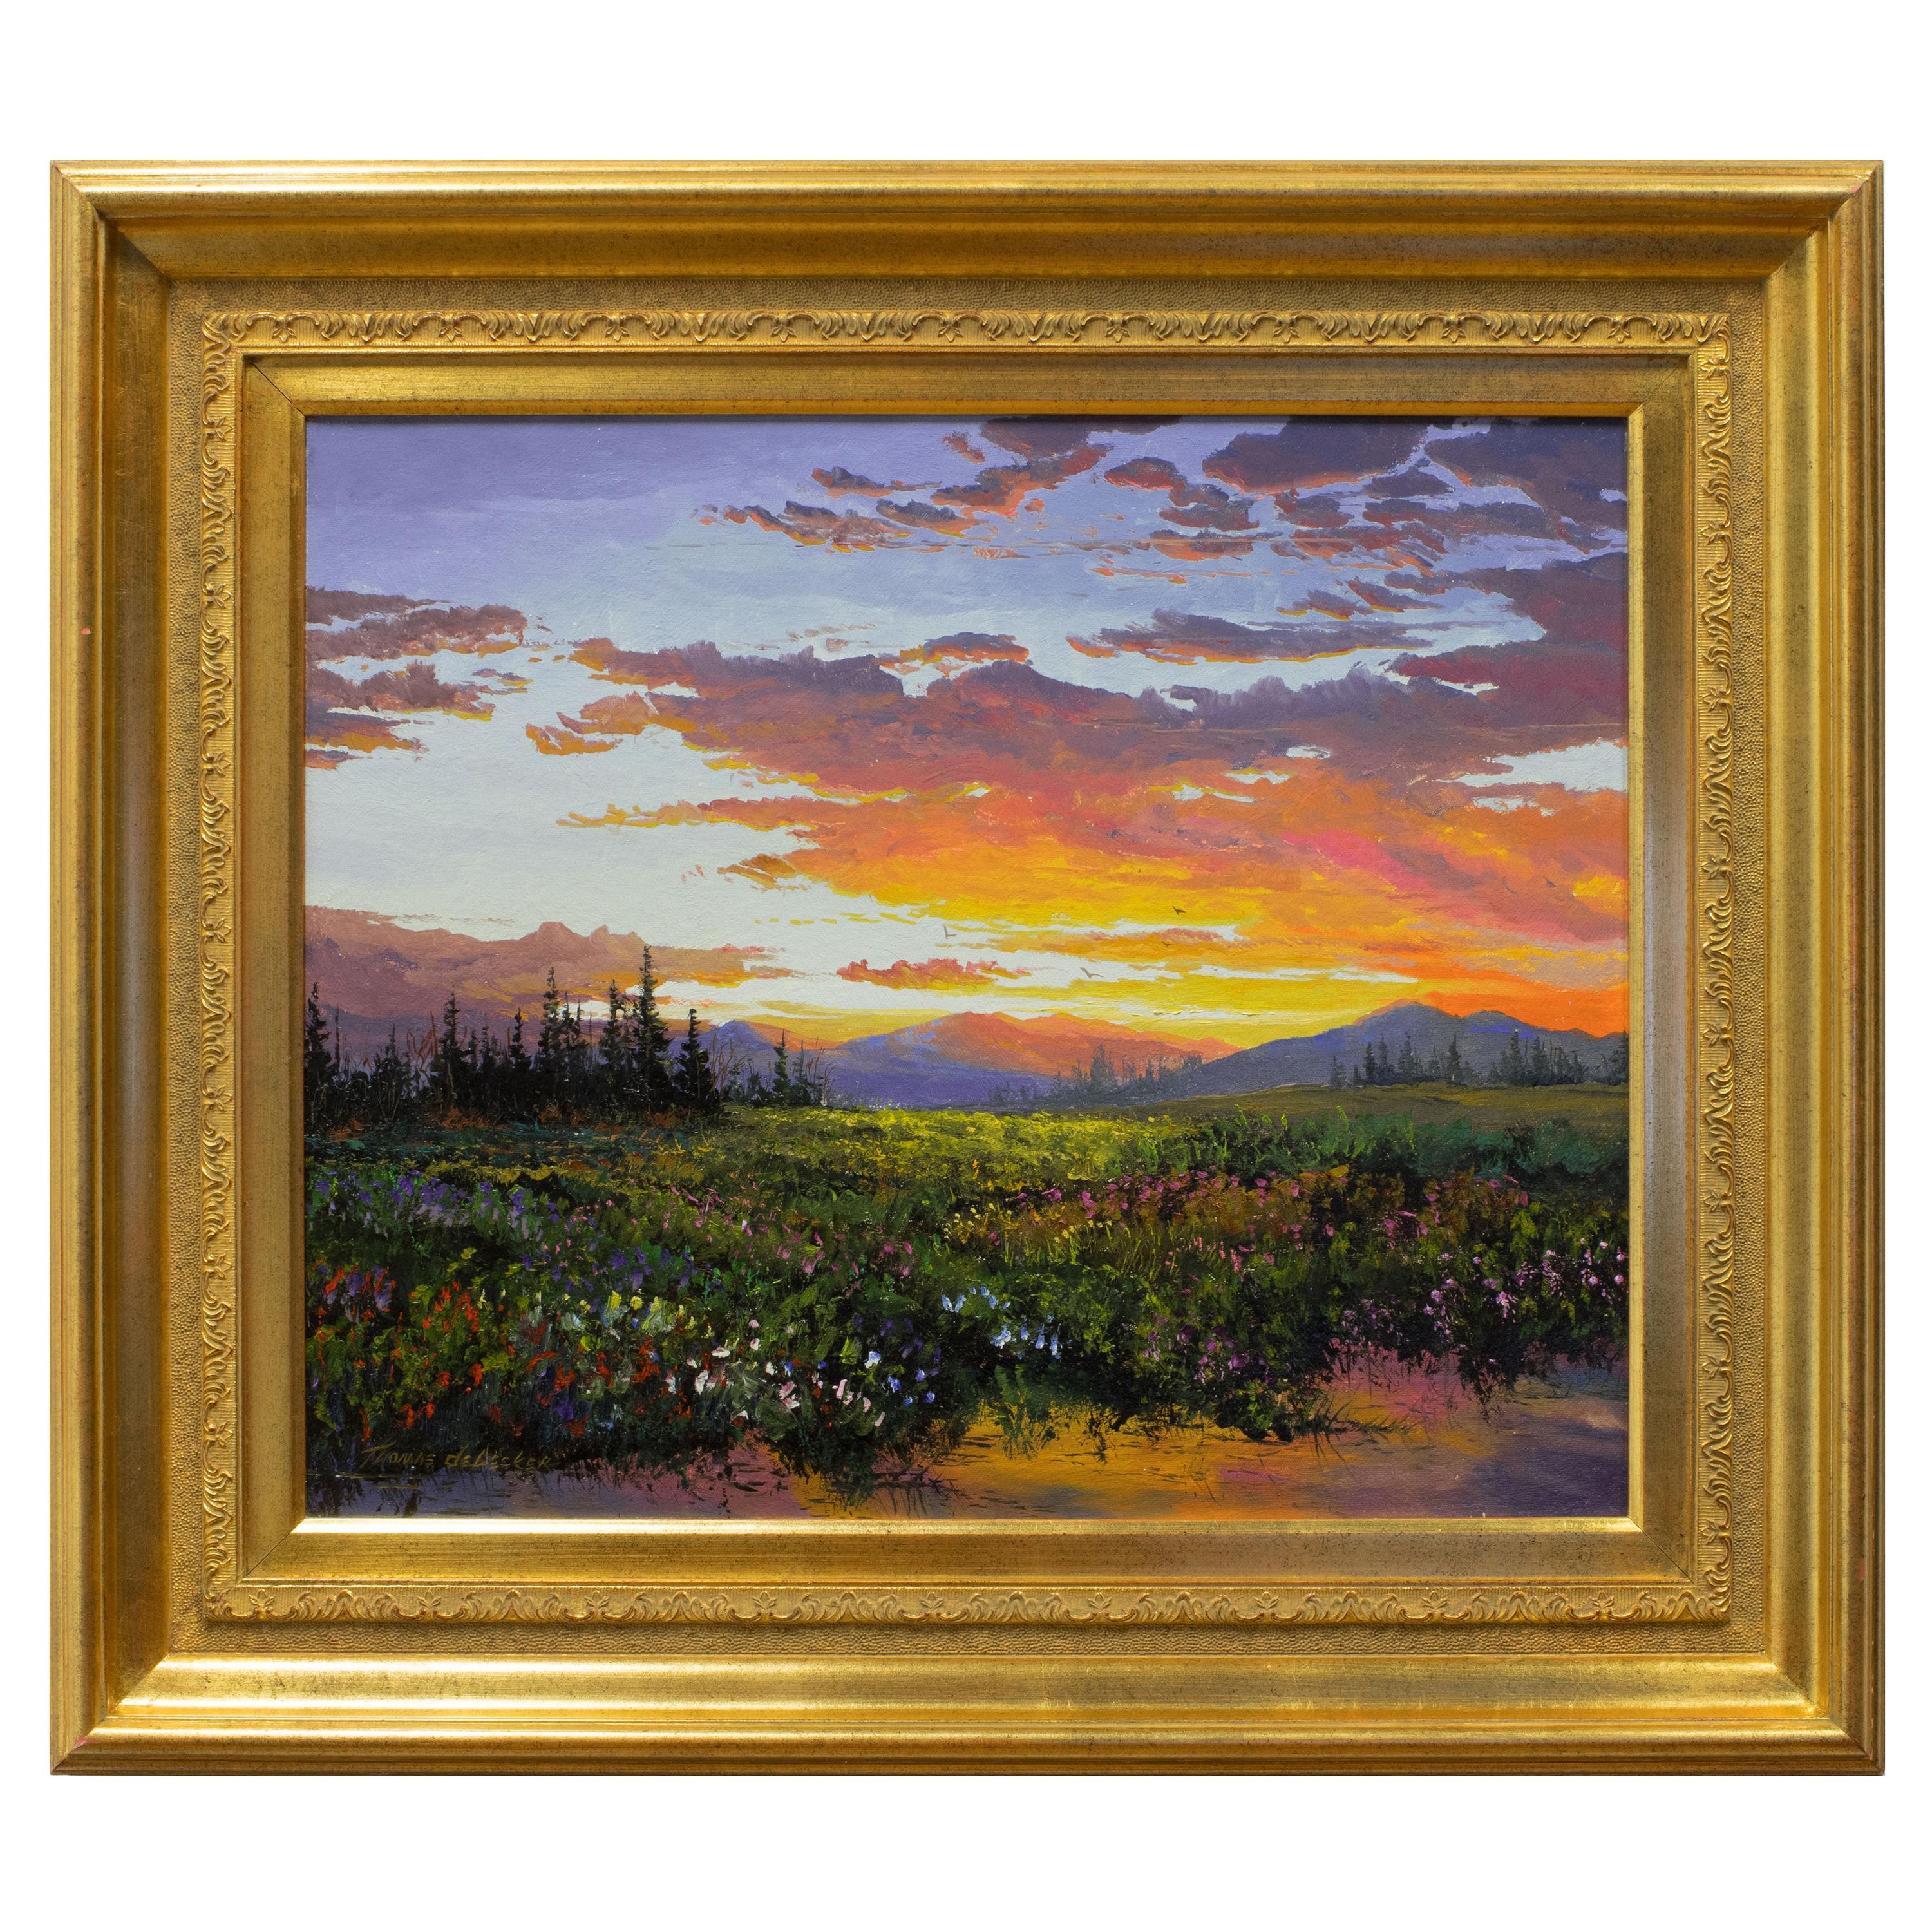 Original Painting "Sunset and Flowers - Summer" by Thomas deDecker